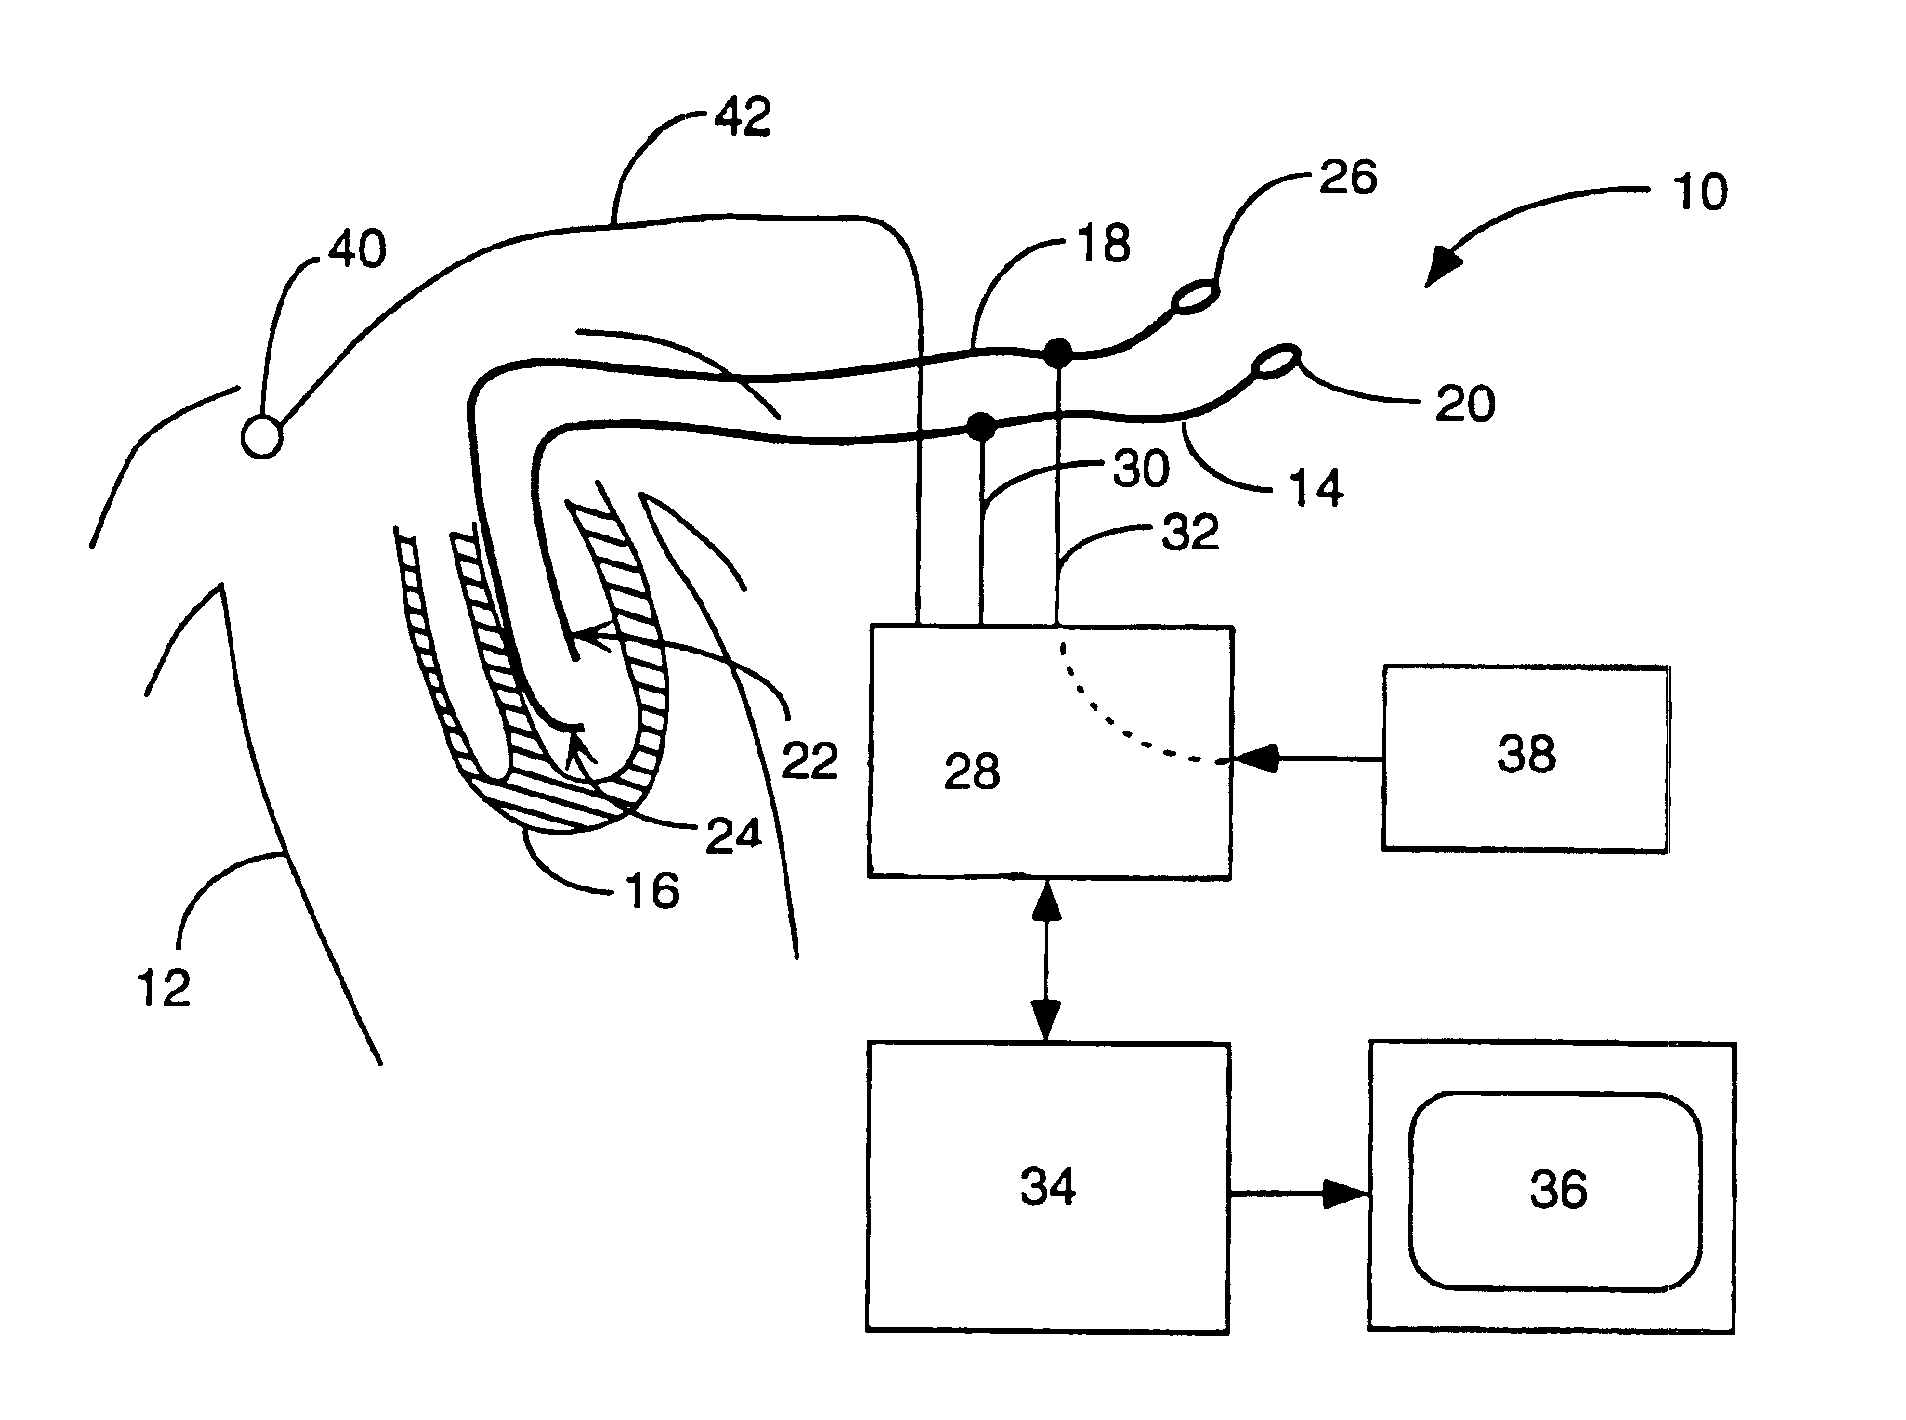 Interface system for endocardial mapping catheter